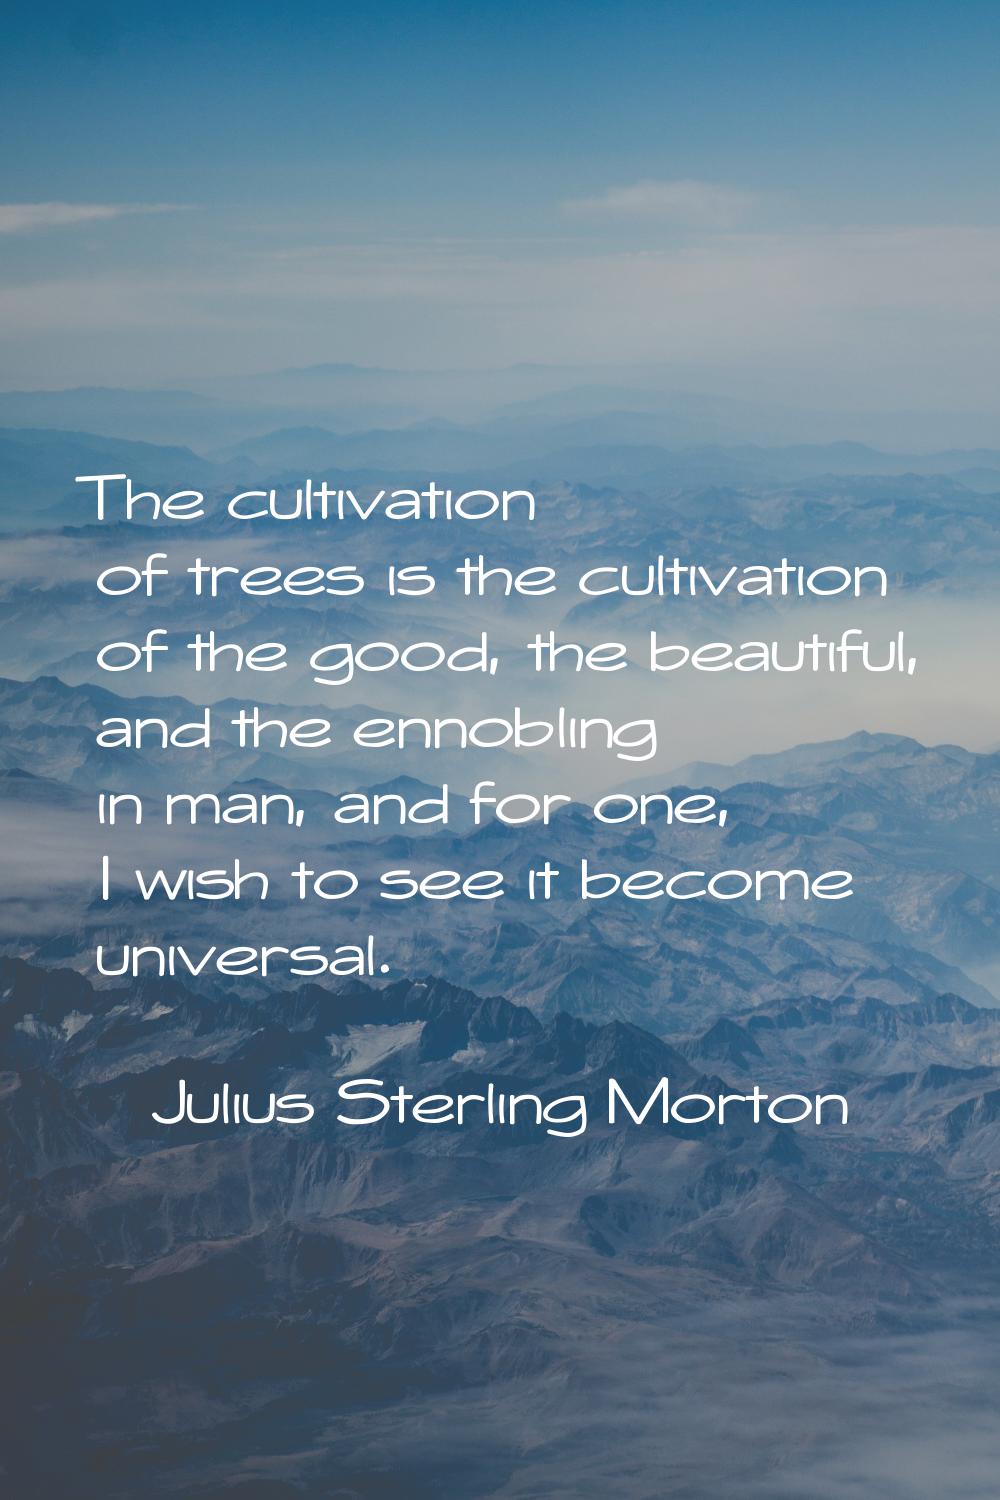 The cultivation of trees is the cultivation of the good, the beautiful, and the ennobling in man, a